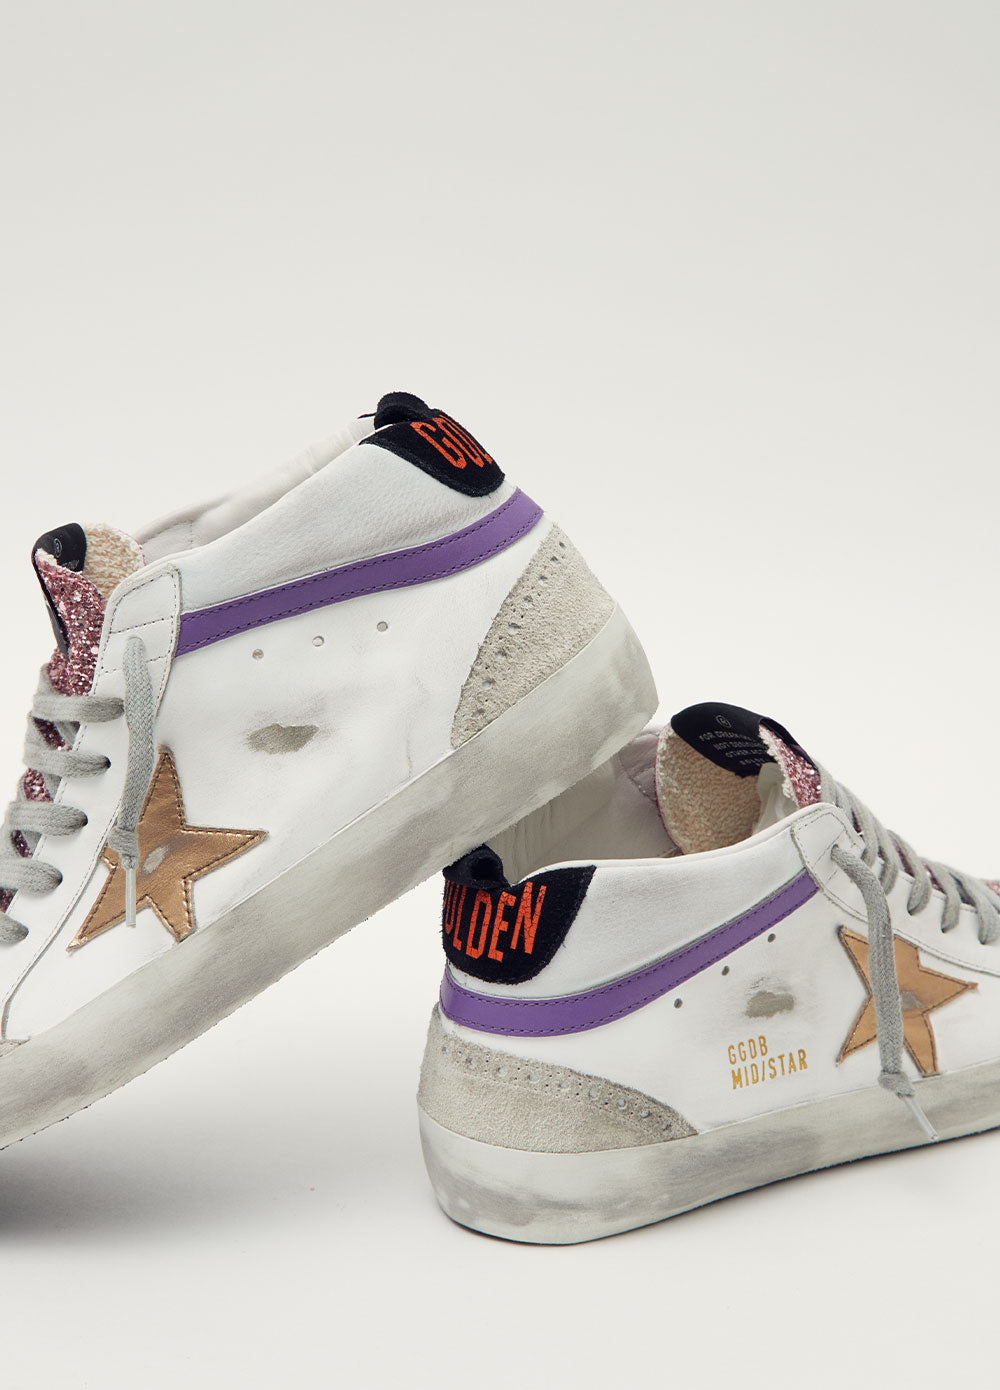 Women's White pink Mid Star Sneakers by Golden Goose | Incu